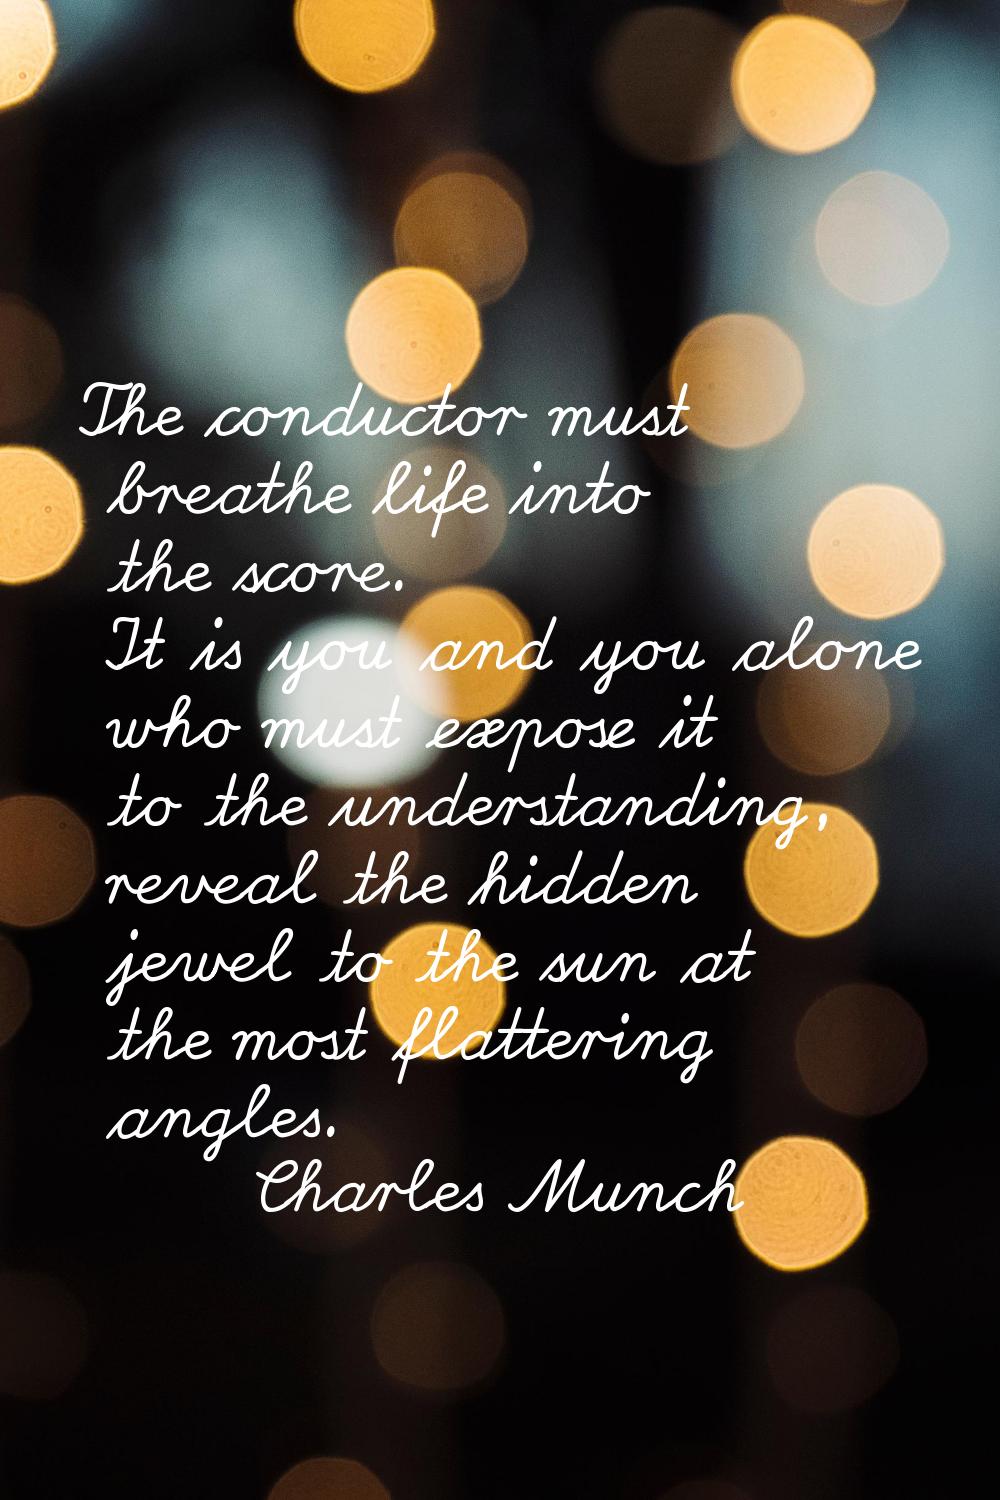 The conductor must breathe life into the score. It is you and you alone who must expose it to the u